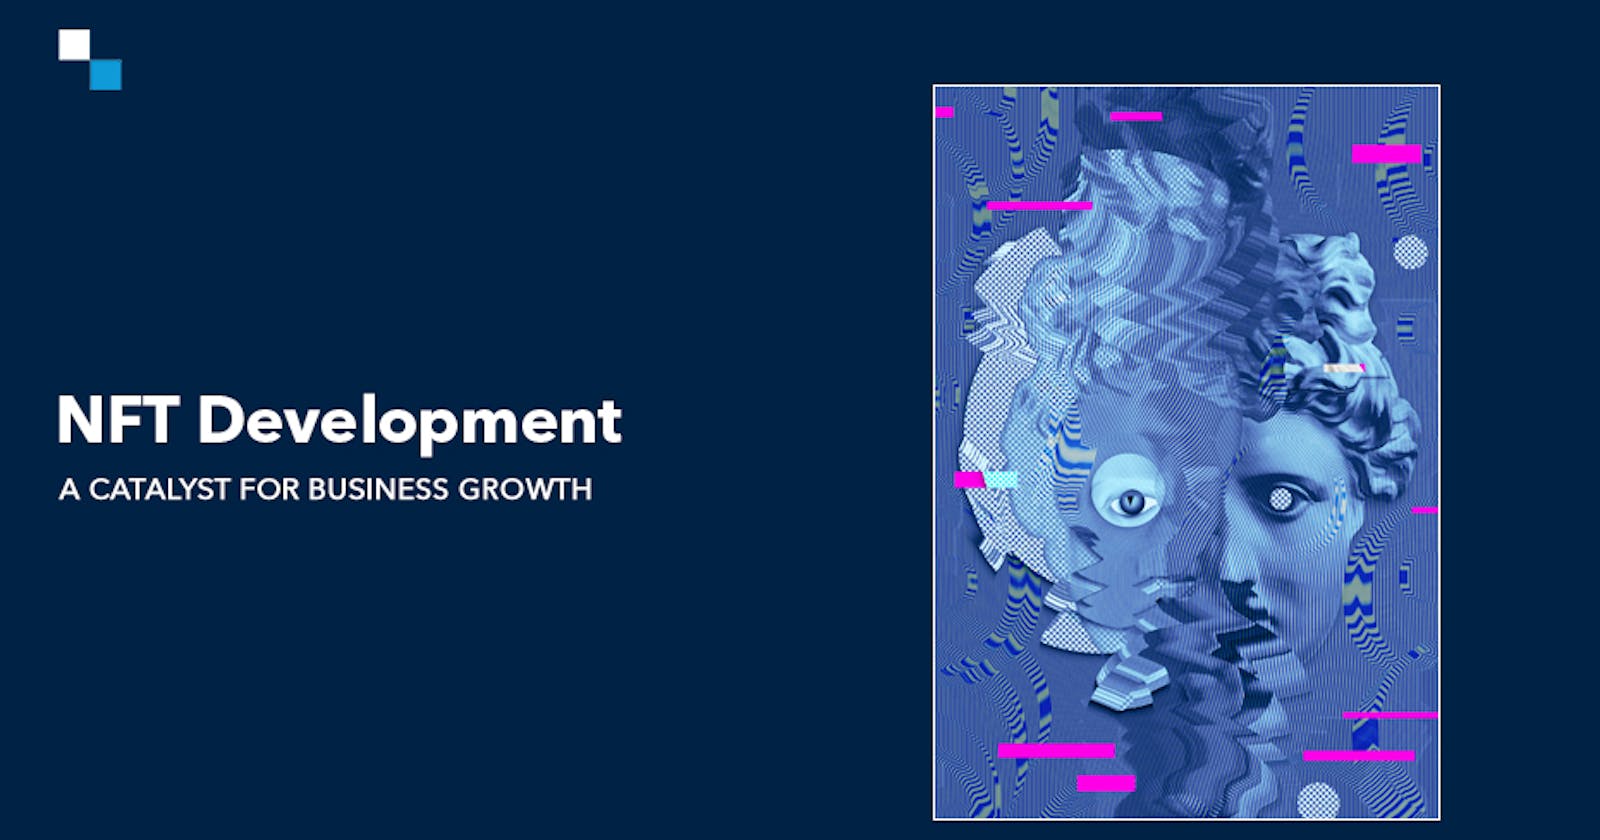 How Does NFT Development Stimulate Business Growth?